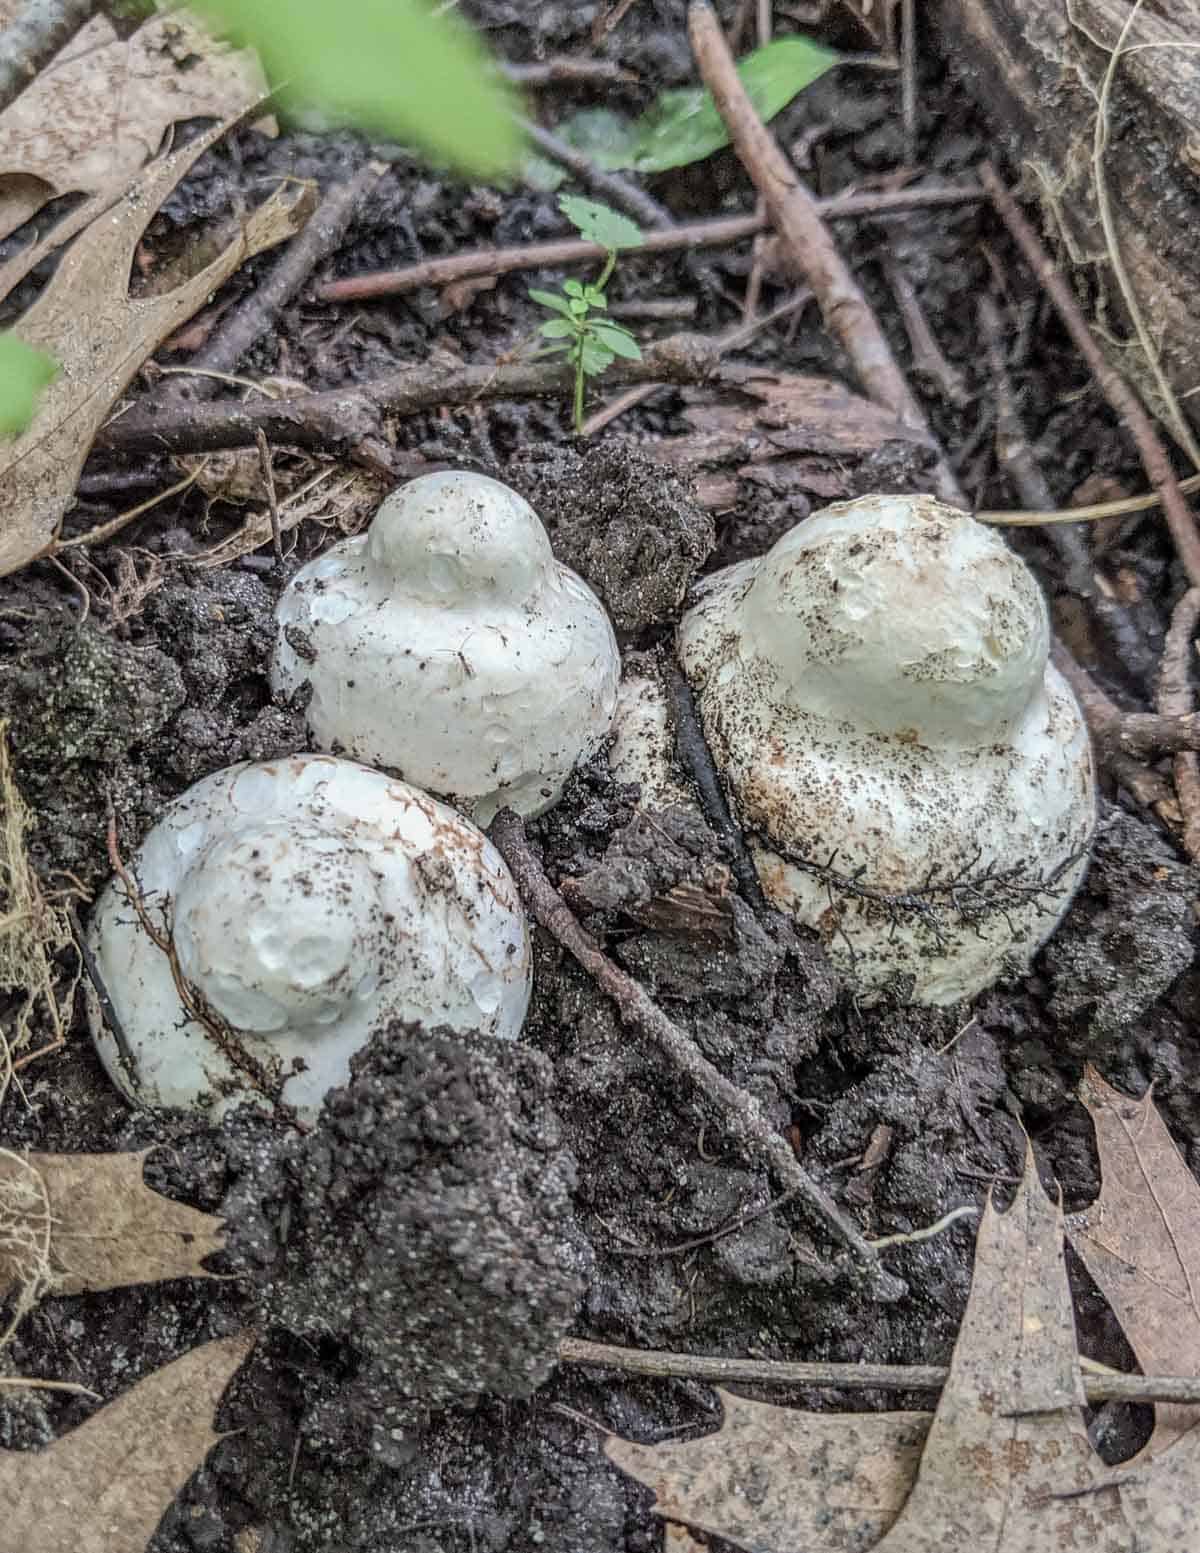 Young destroying angel mushrooms growing in the egg stage. 